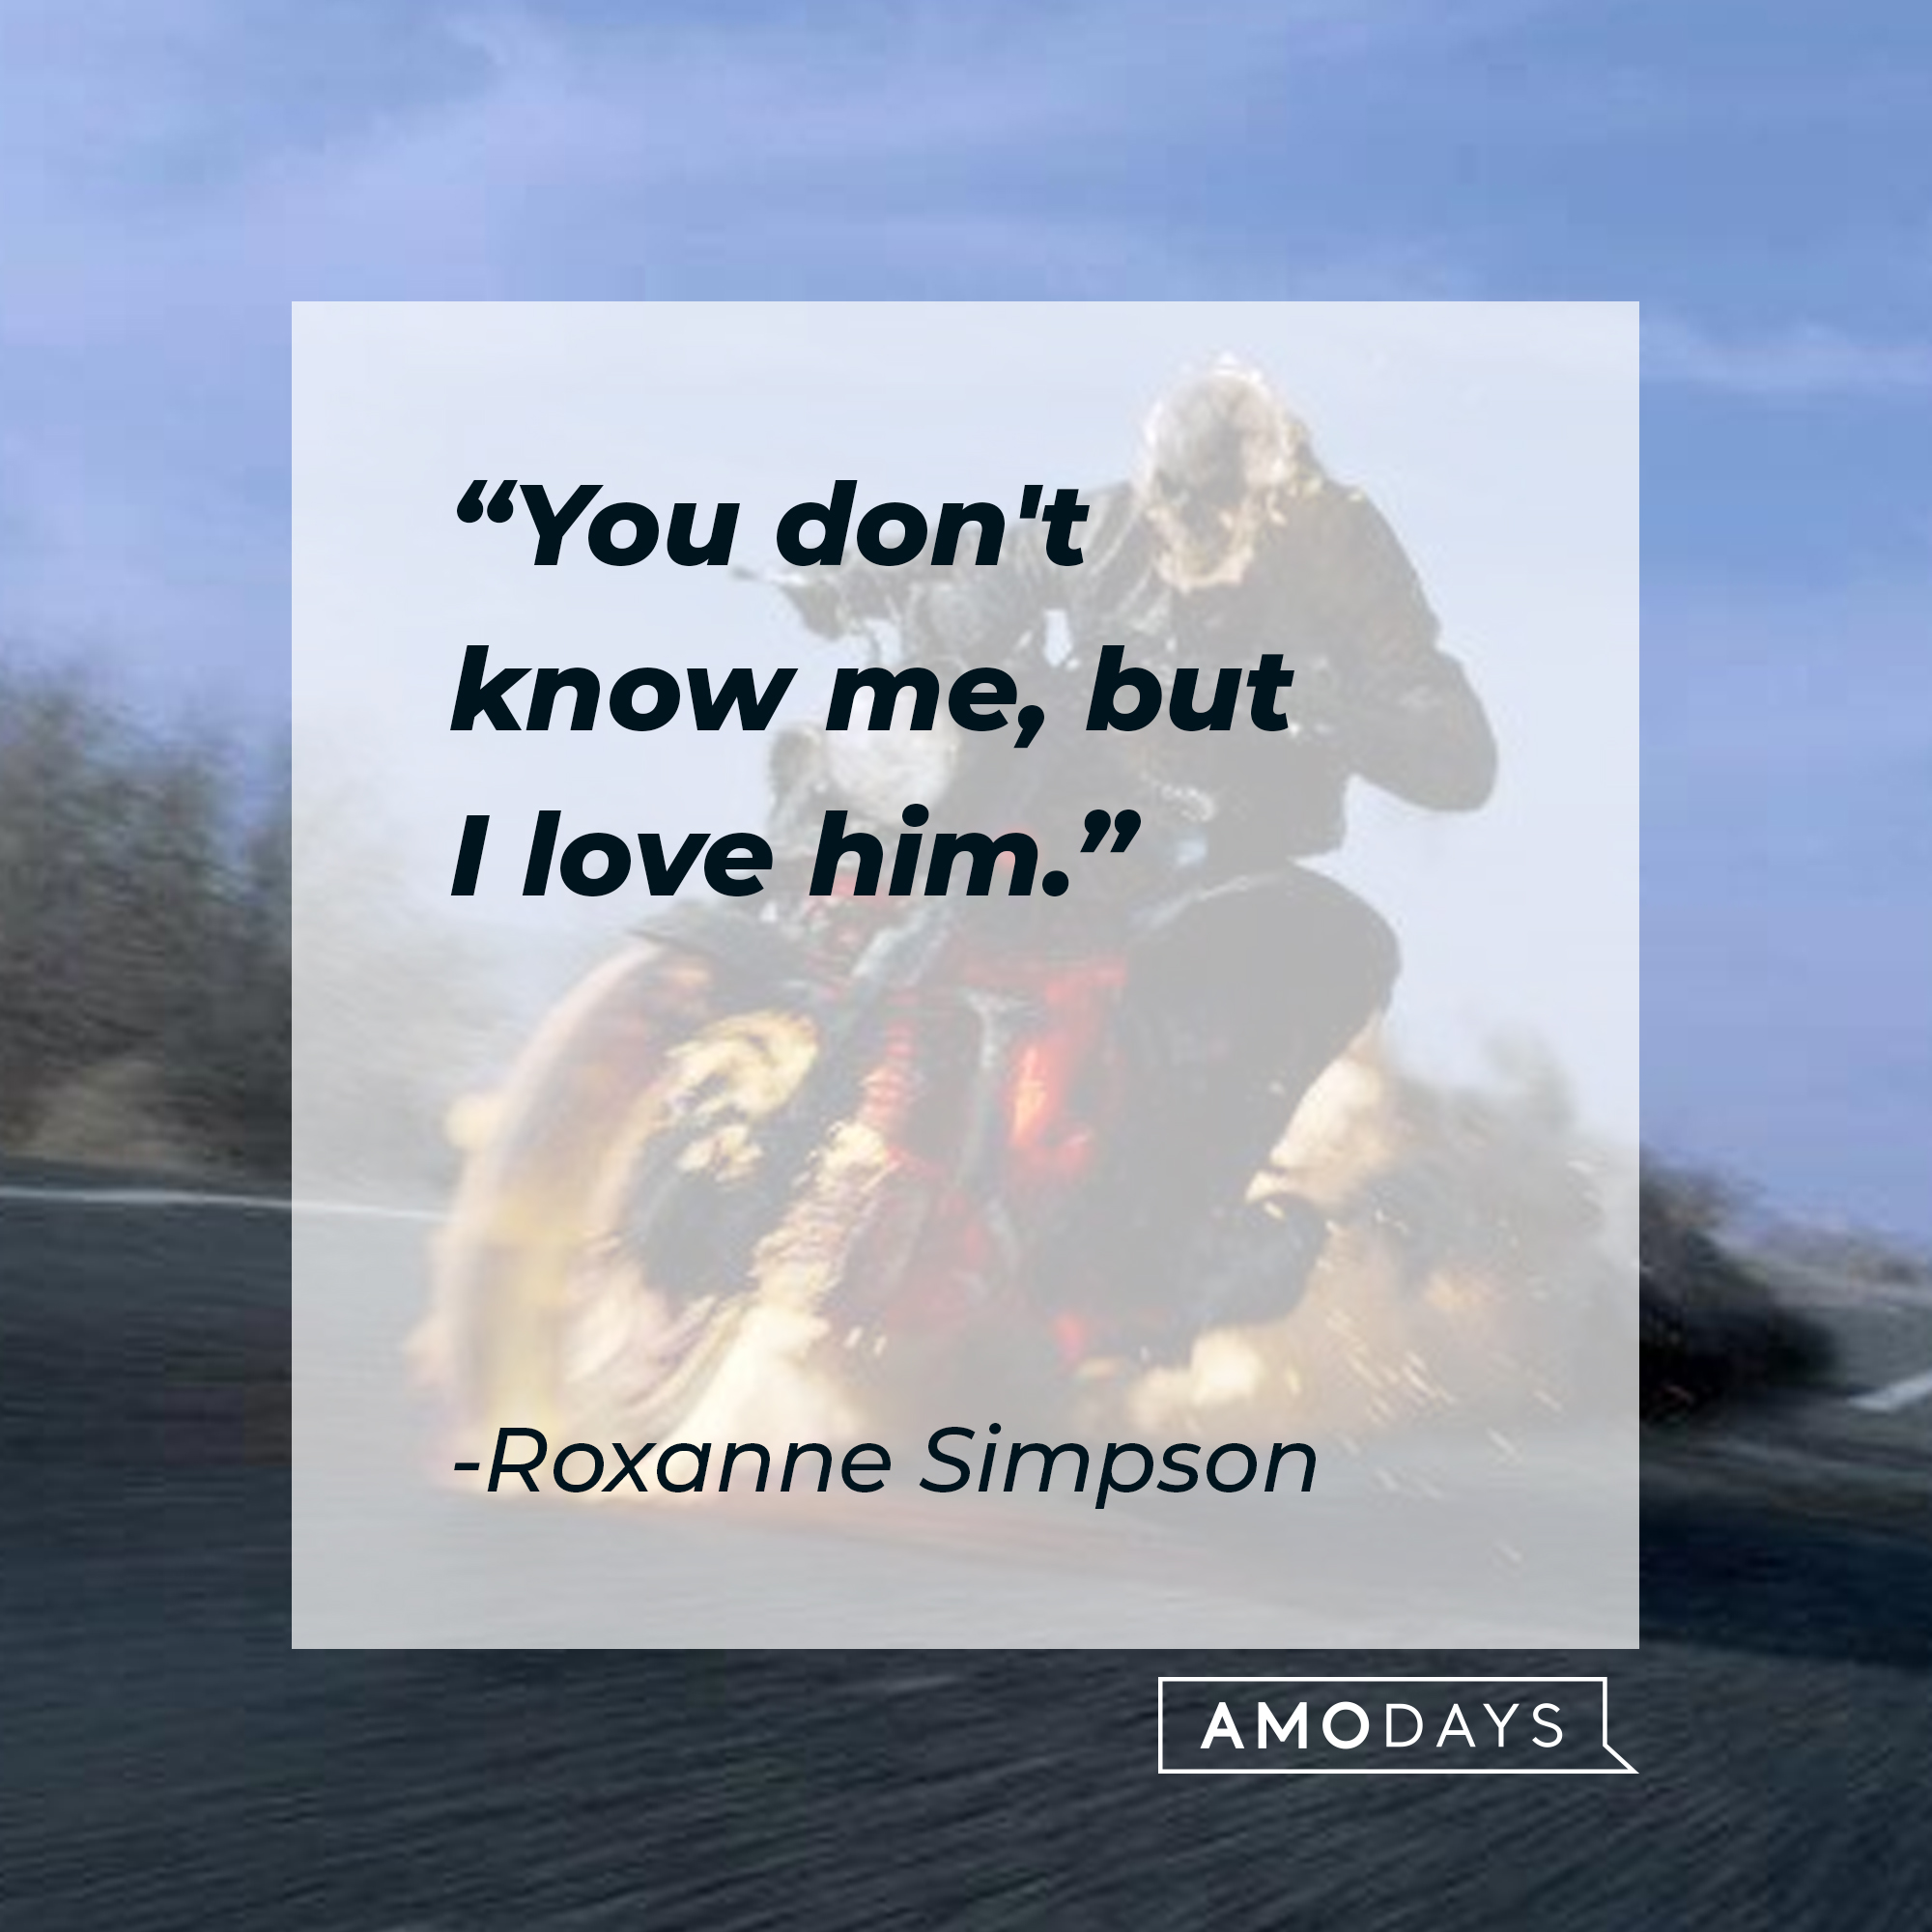 Roxanne Simpson's quote: "You don't know me, but I love him." | Source: facebook.com/ghostridermovie